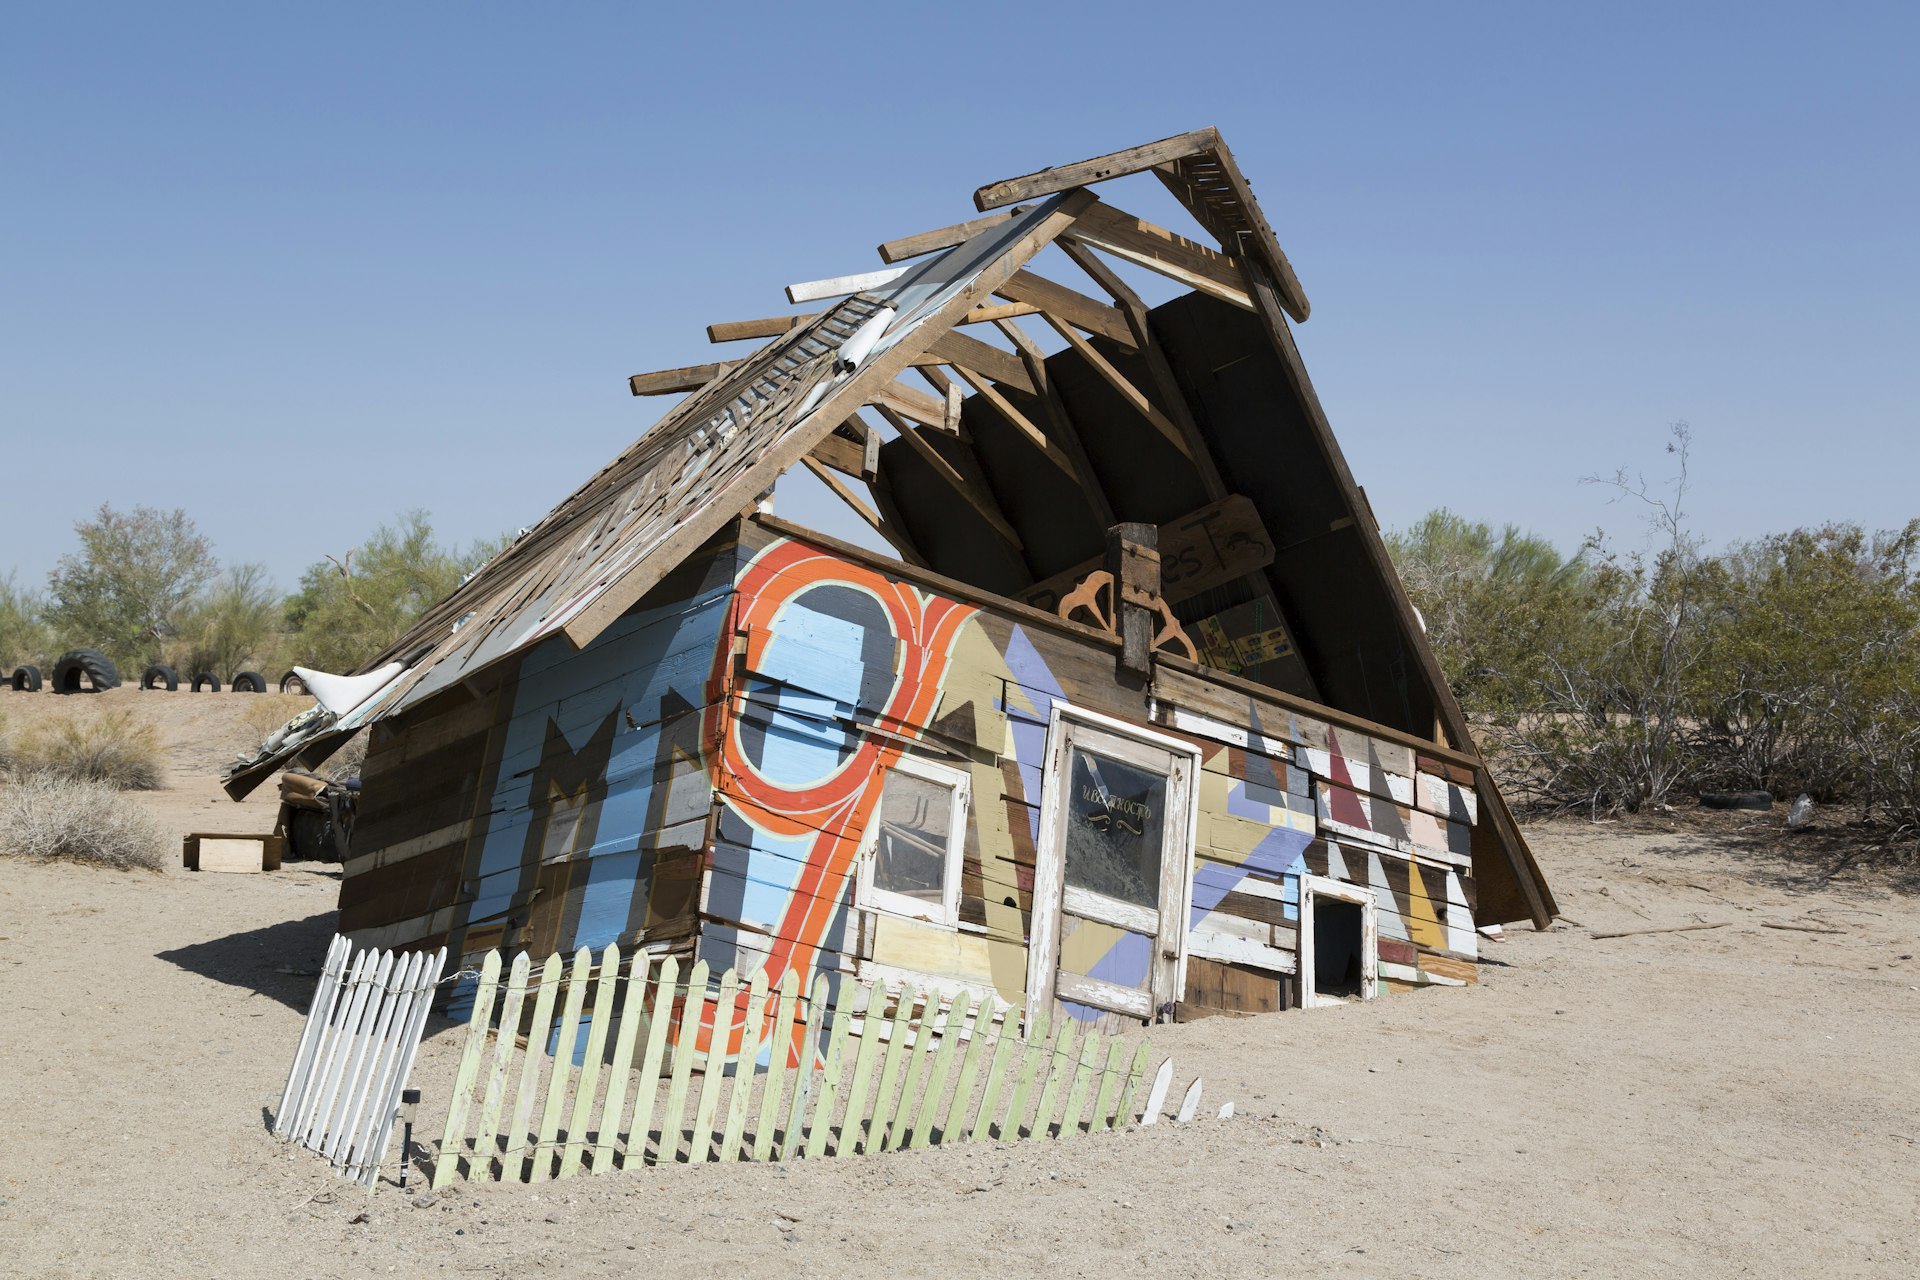 A small painted house looks like its sinking into the desert at the East Jesus art collective in Slab City © Buyenlarge / Getty Images